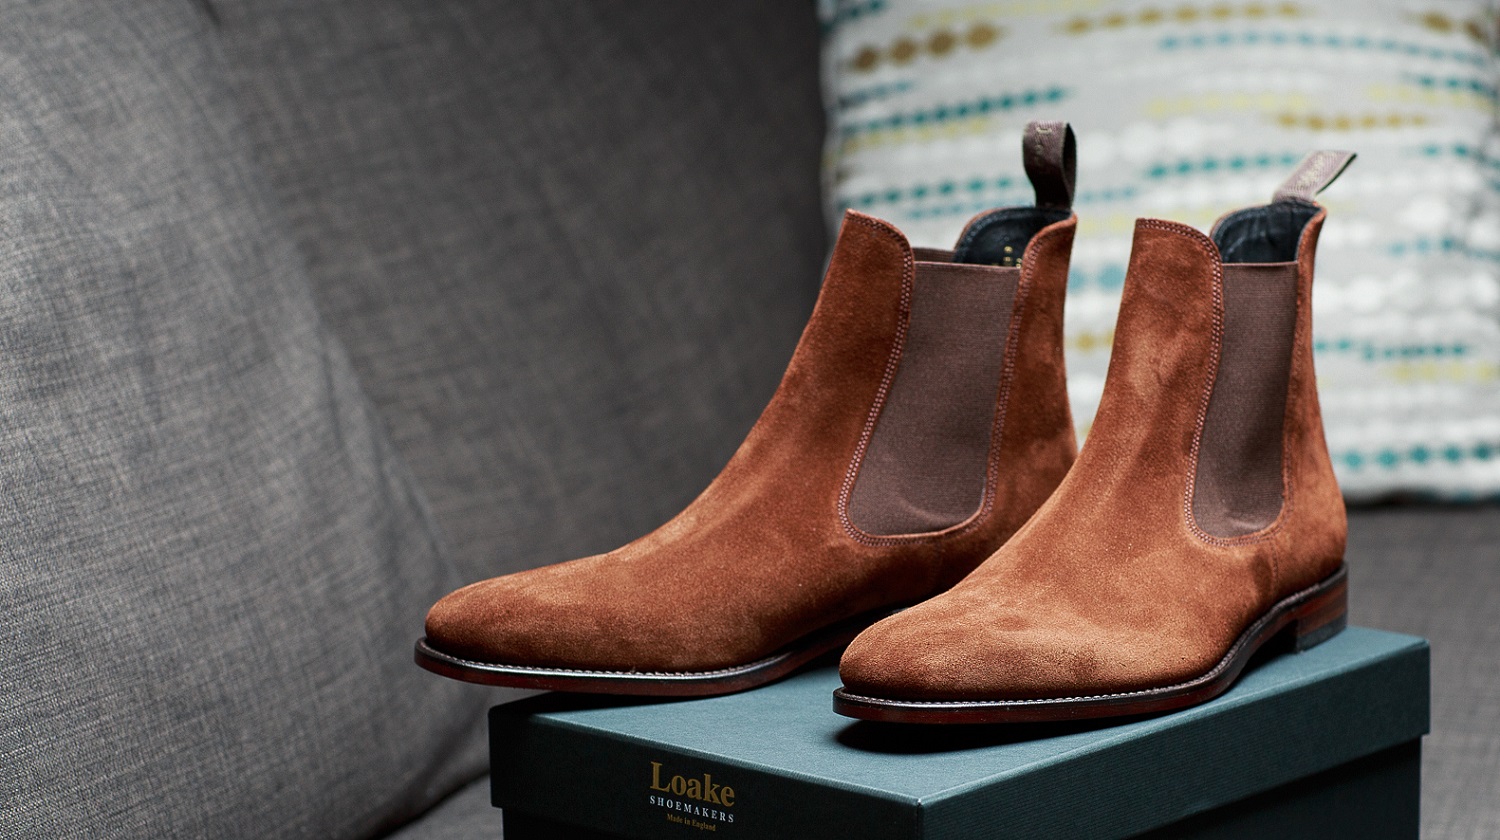 Review: The Loake Mitchum Boot